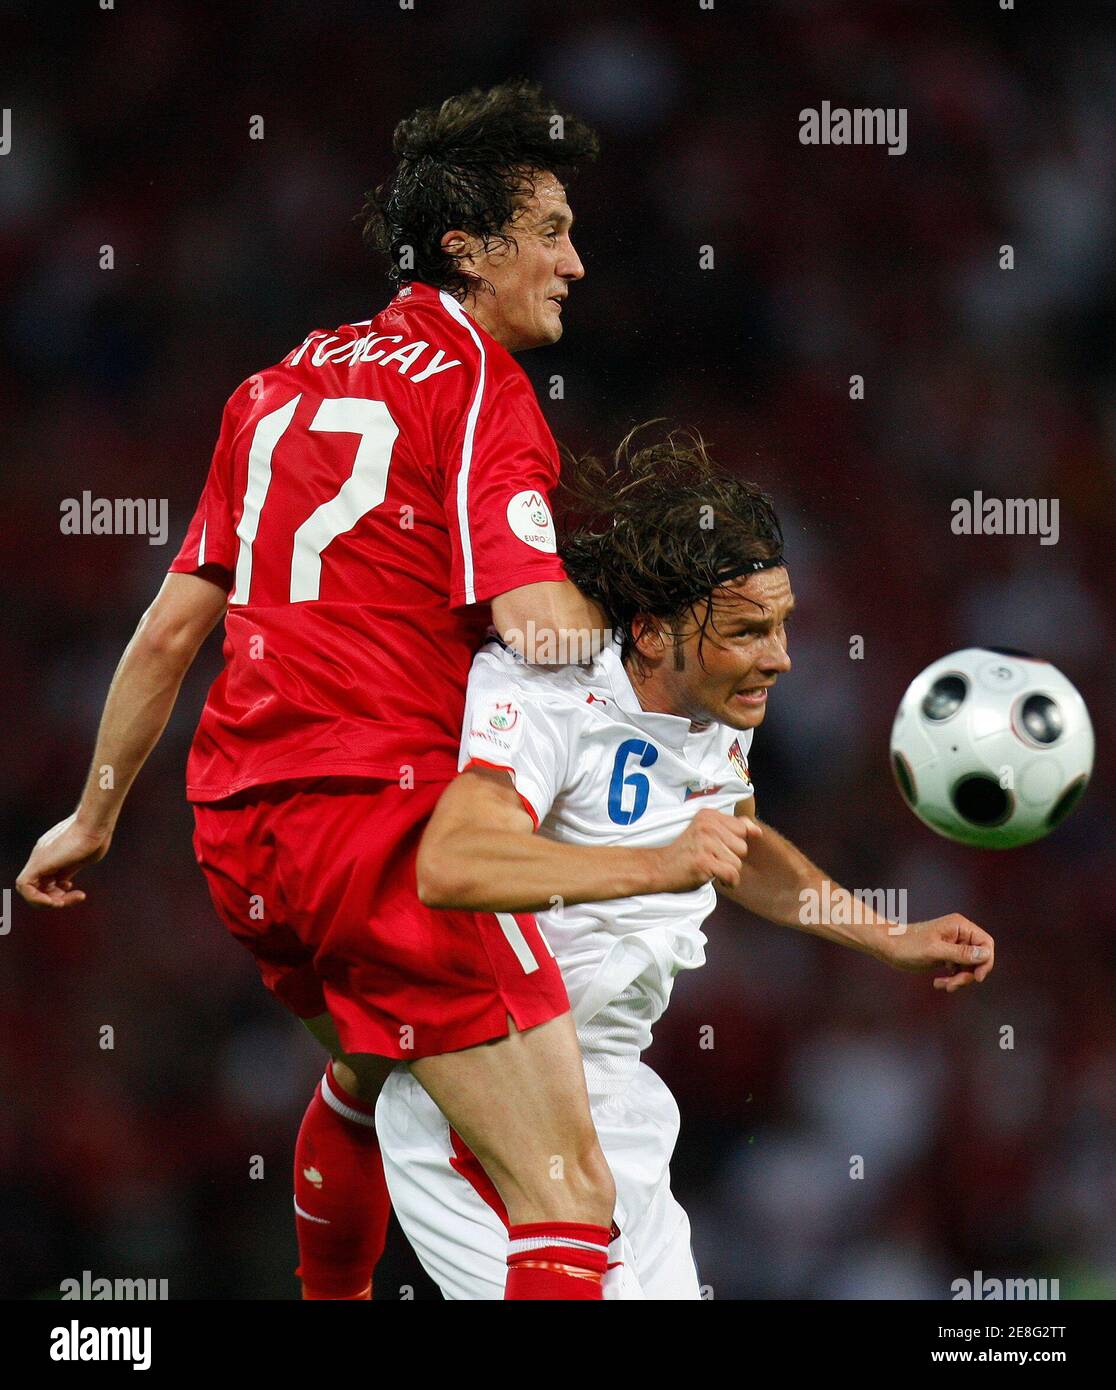 Turkey's Tuncay Sanli (L) challenges Czech Republic's Marek Jankulovski during their Group A Euro 2008 soccer match at Stade de Geneve stadium in Geneva June 15, 2008.     REUTERS/Jerry Lampen (SWITZERLAND)   MOBILE OUT. EDITORIAL USE ONLY Stock Photo